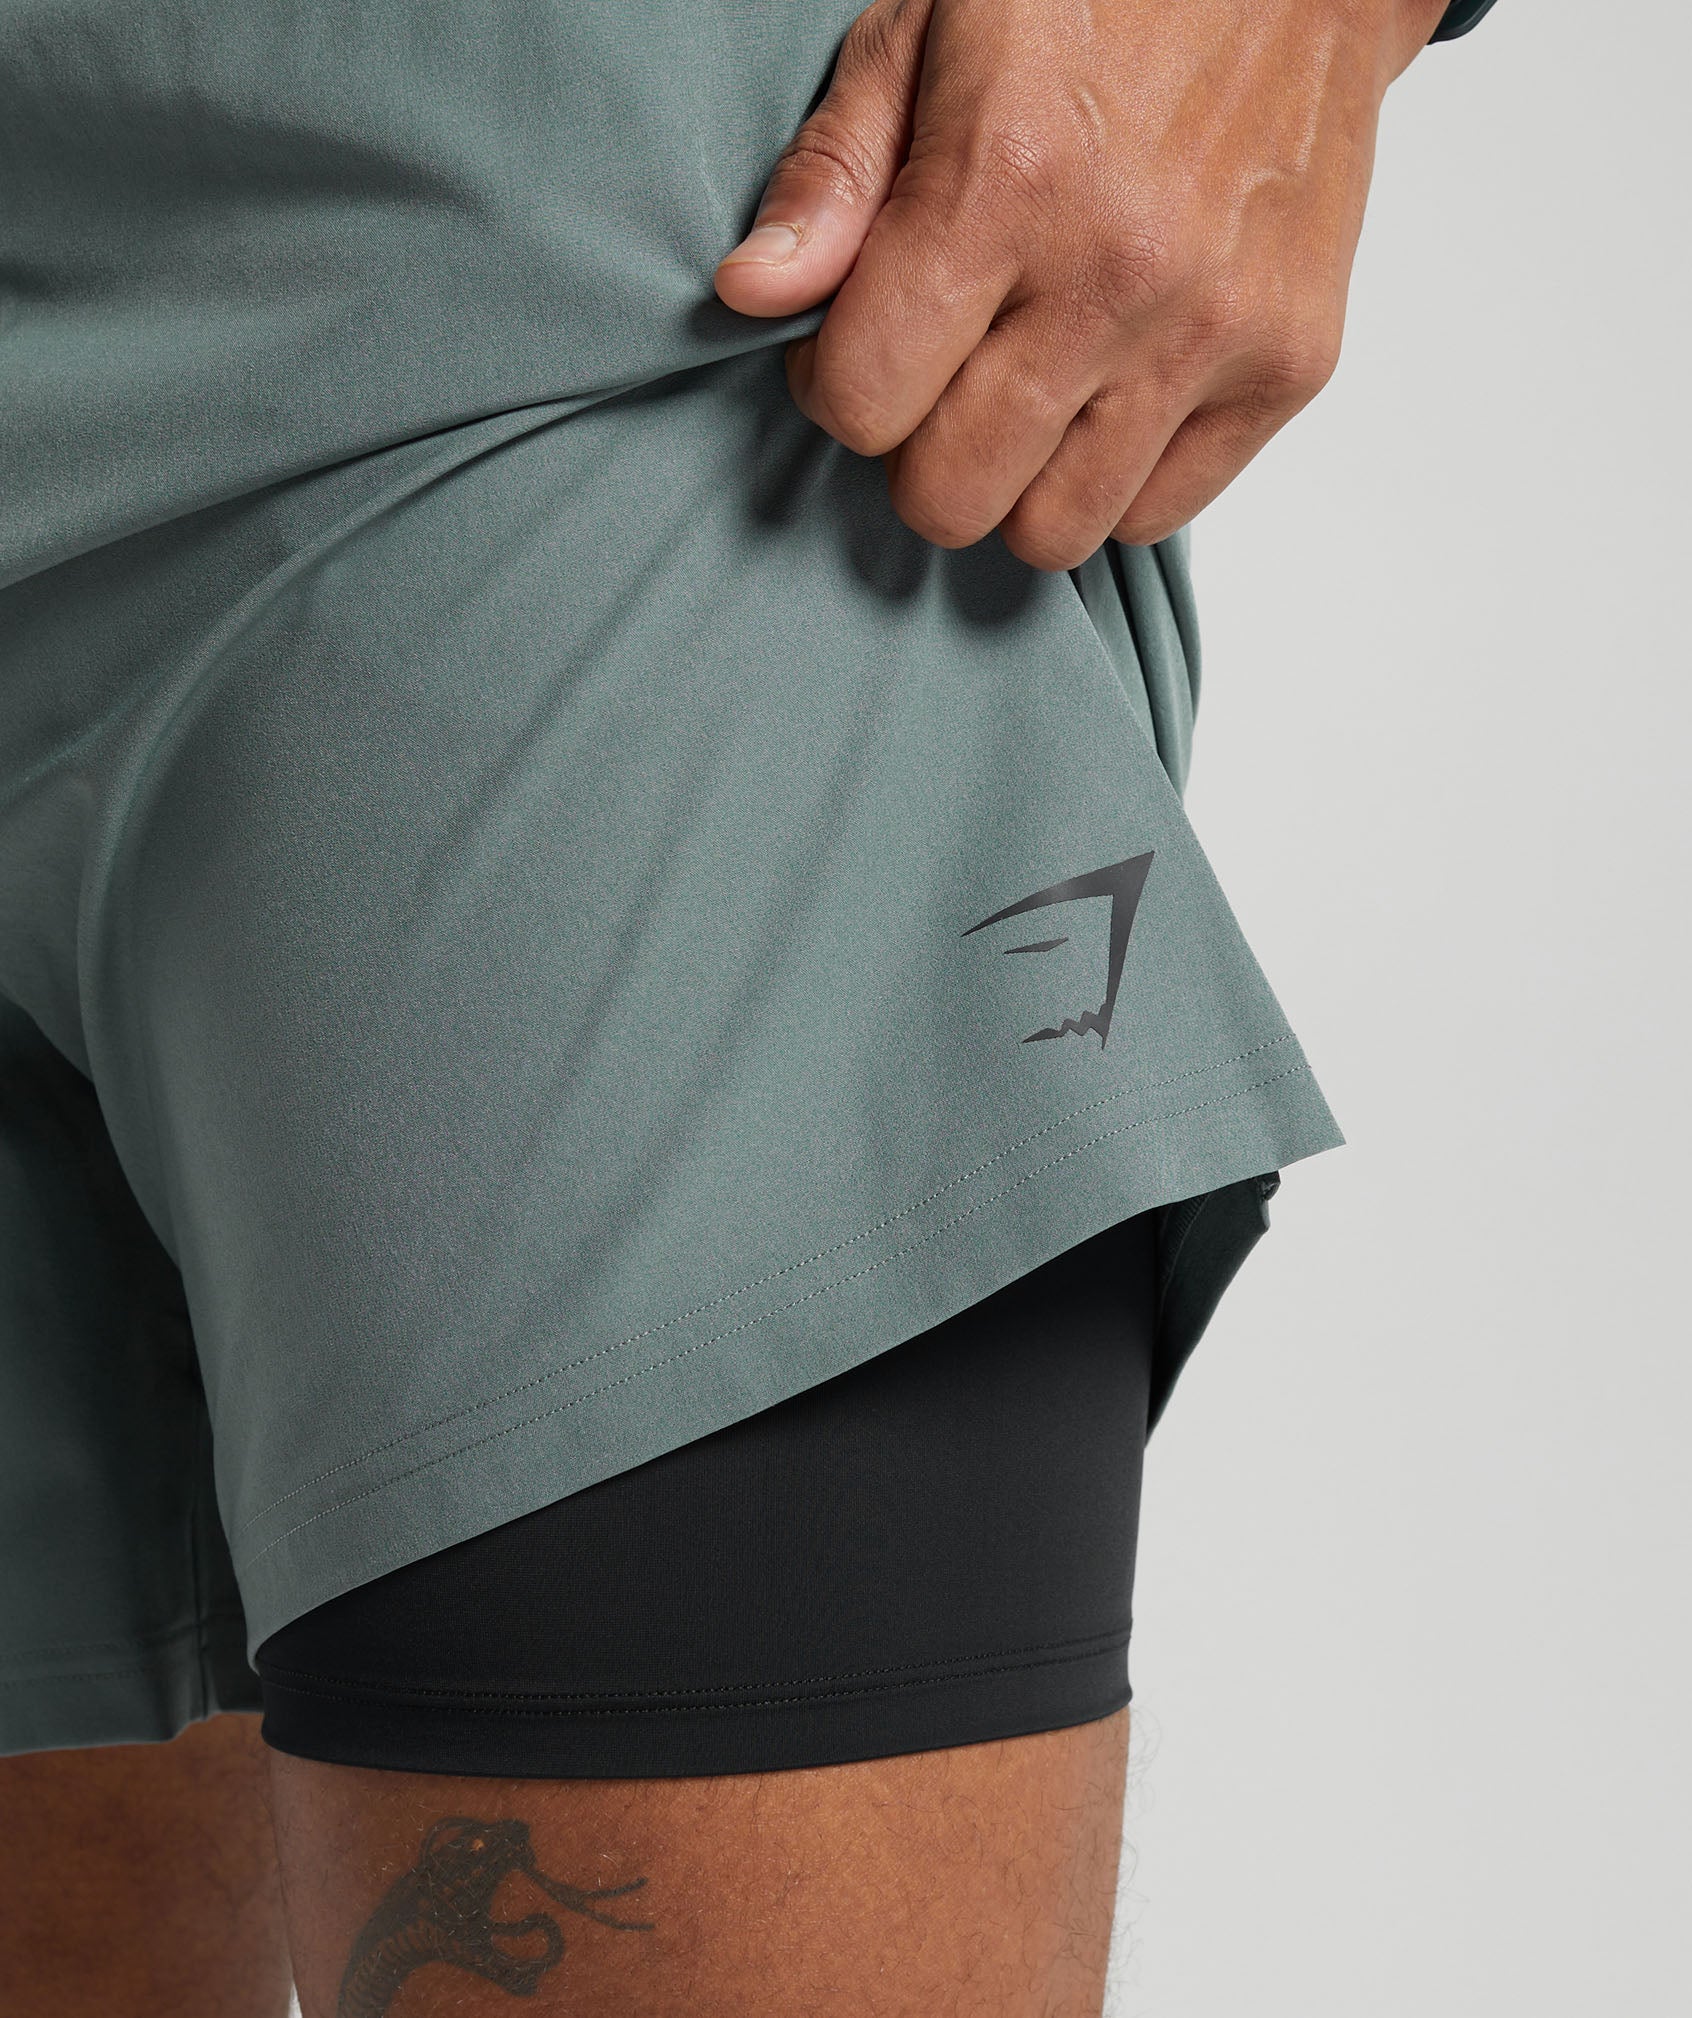 Land to Water 6" Shorts in Cargo Teal - view 7